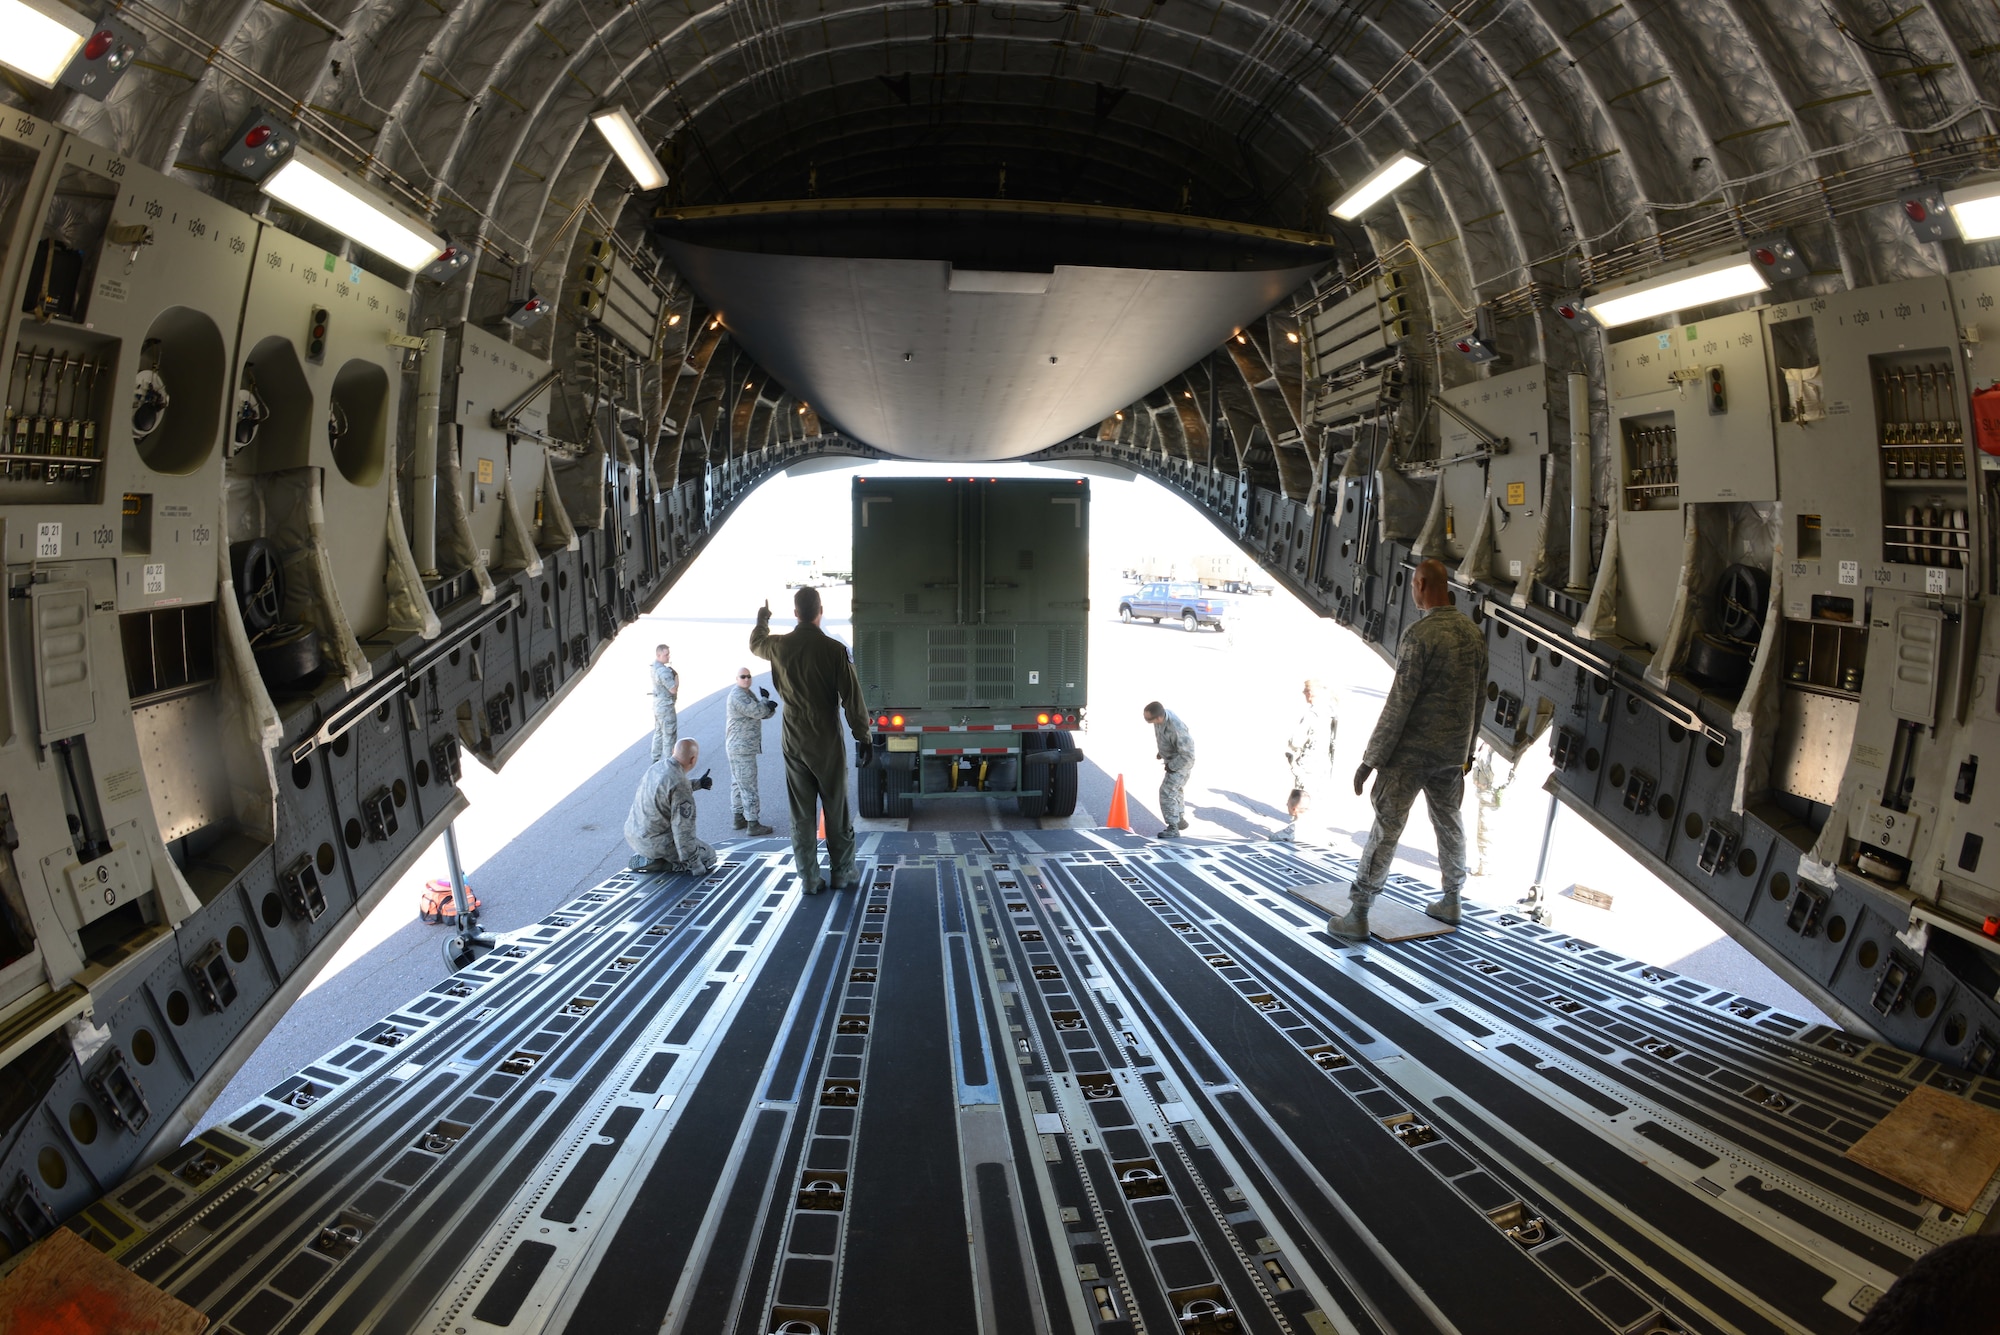 Colorado Air National Guard Airmen from the 233d Space Group, Greeley Air National Guard Station, load a Mission Vehicle 118 onto a C-17 Globemaster III at Buckley Air Force Base, Colo., Oct. 17, 2015. This exercise is part of the 140th Wing’s four-day wartime readiness inspection, which is an implementation of the new Air Force Inspection System, and will assess the wing's ability to perform their combat missions. (U.S. Air National Guard photo by Tech. Sgt. Nicole Manzanares)